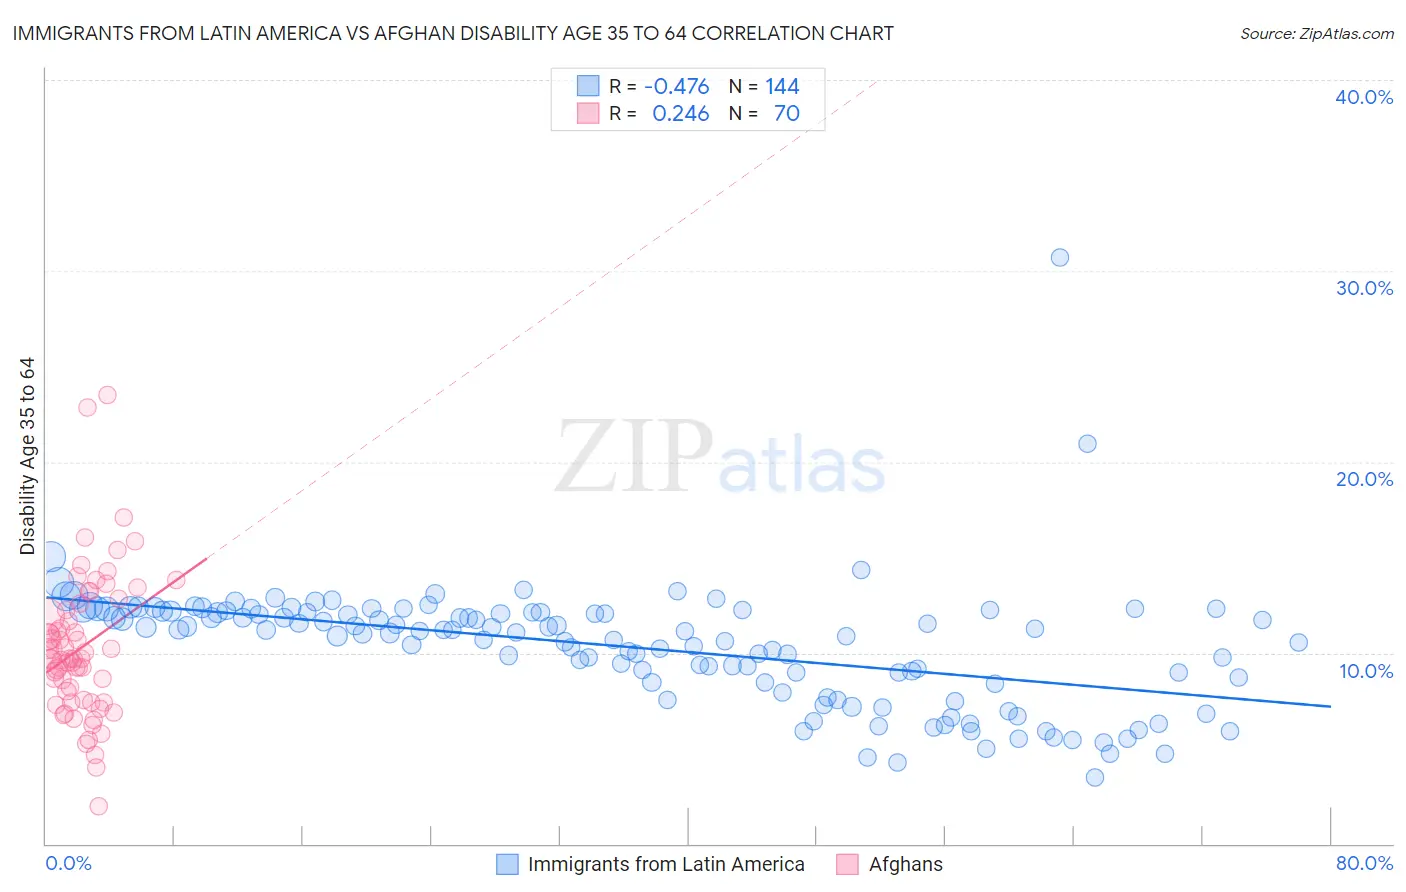 Immigrants from Latin America vs Afghan Disability Age 35 to 64